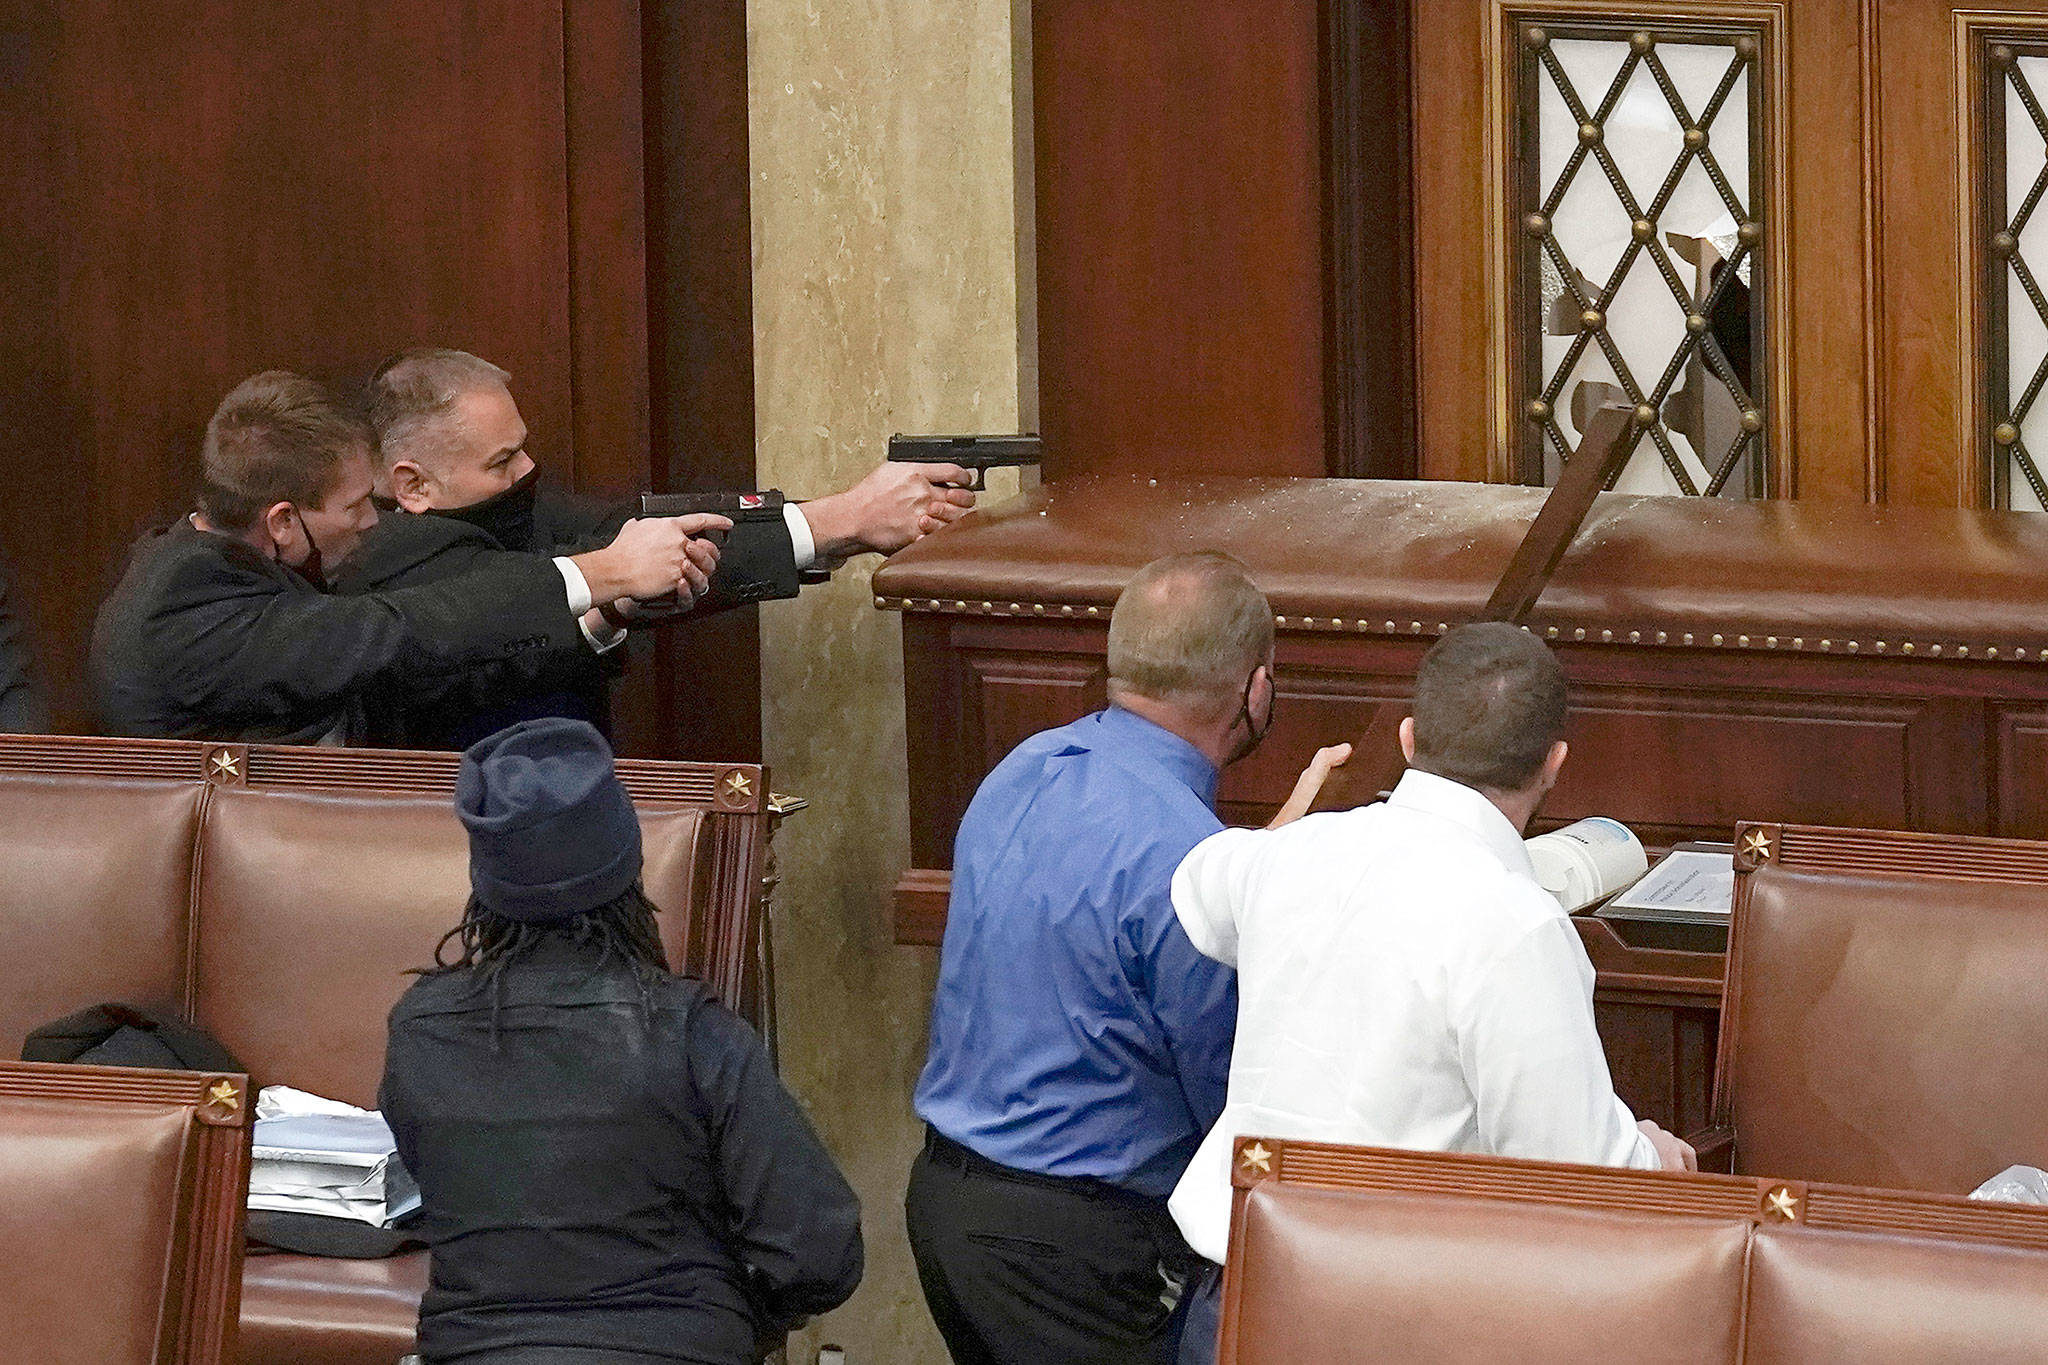 U.S. Capitol Police with guns drawn watch as protesters try to break into the House Chamber at the U.S. Capitol on Wednesday in Washington. (AP Photo/J. Scott Applewhite)